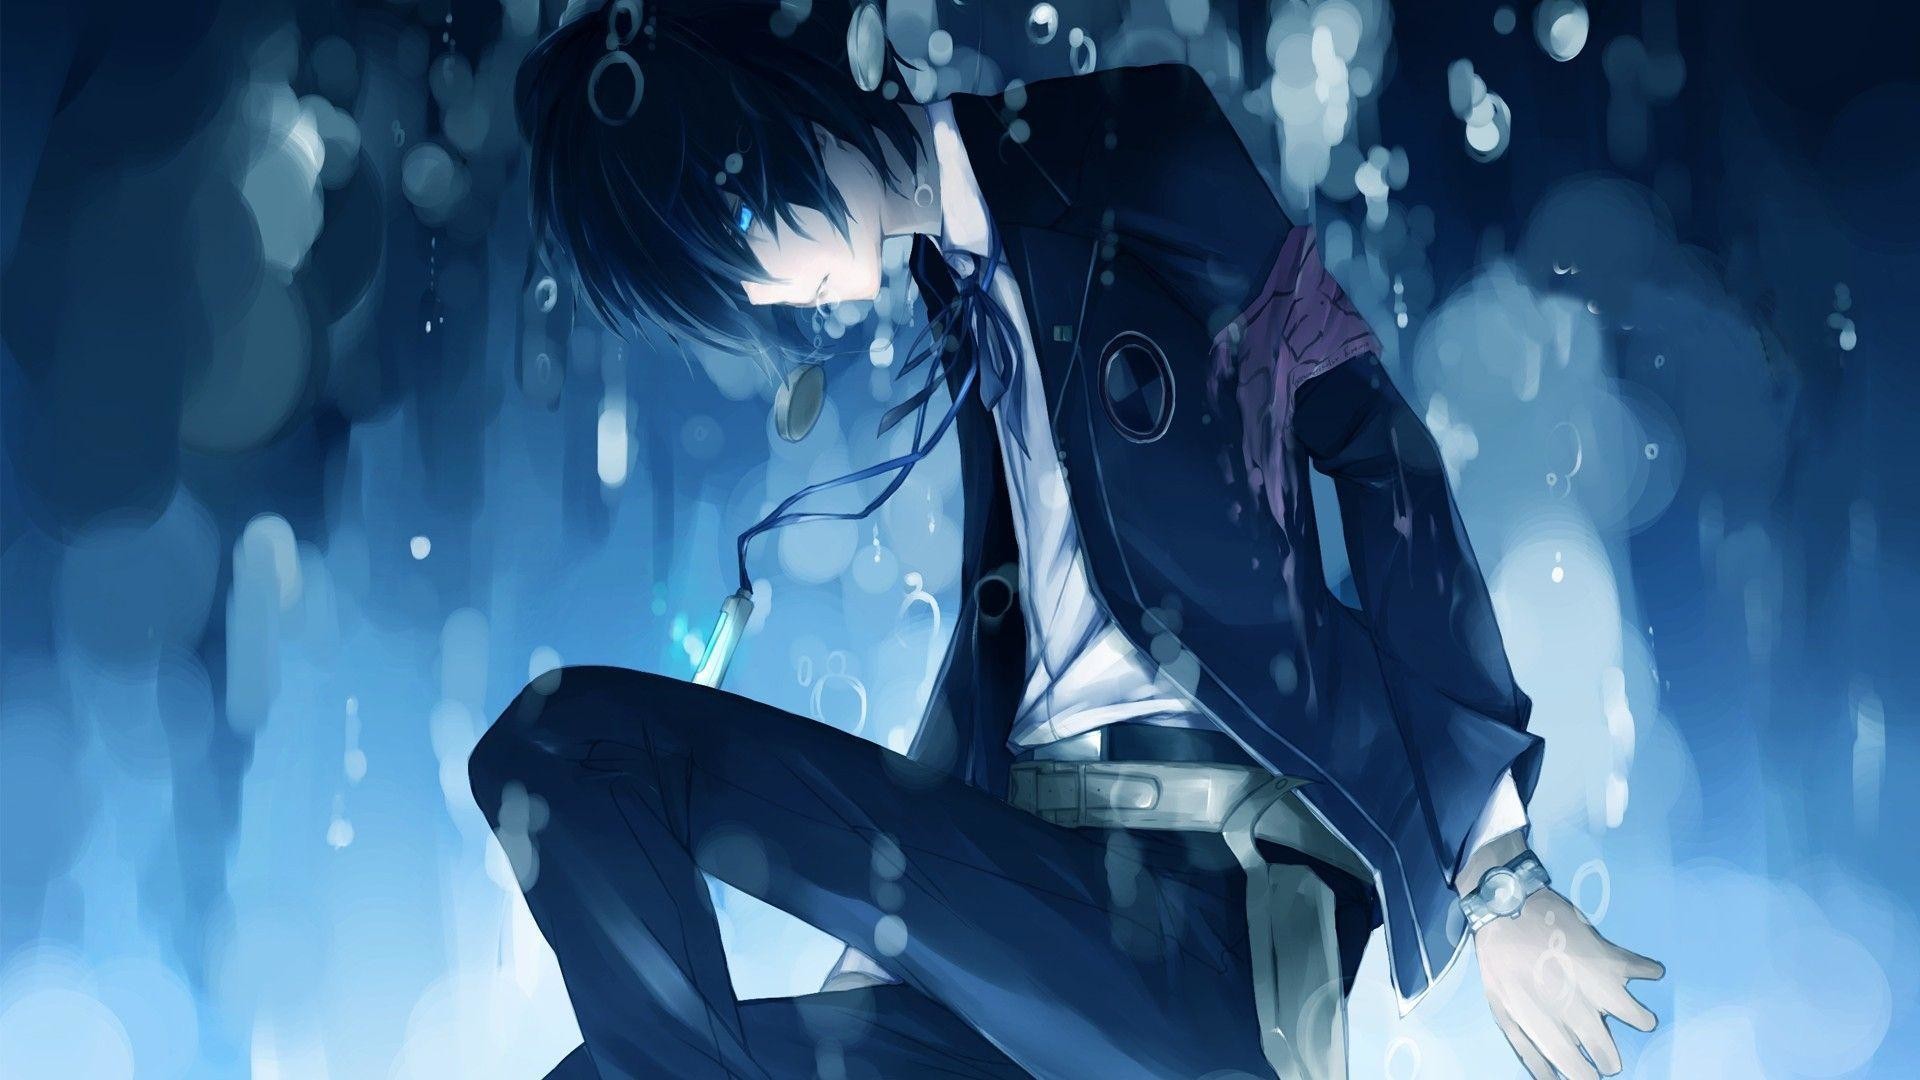 1920x1080 Emo Anime Wallpapers - Viewing Gallery